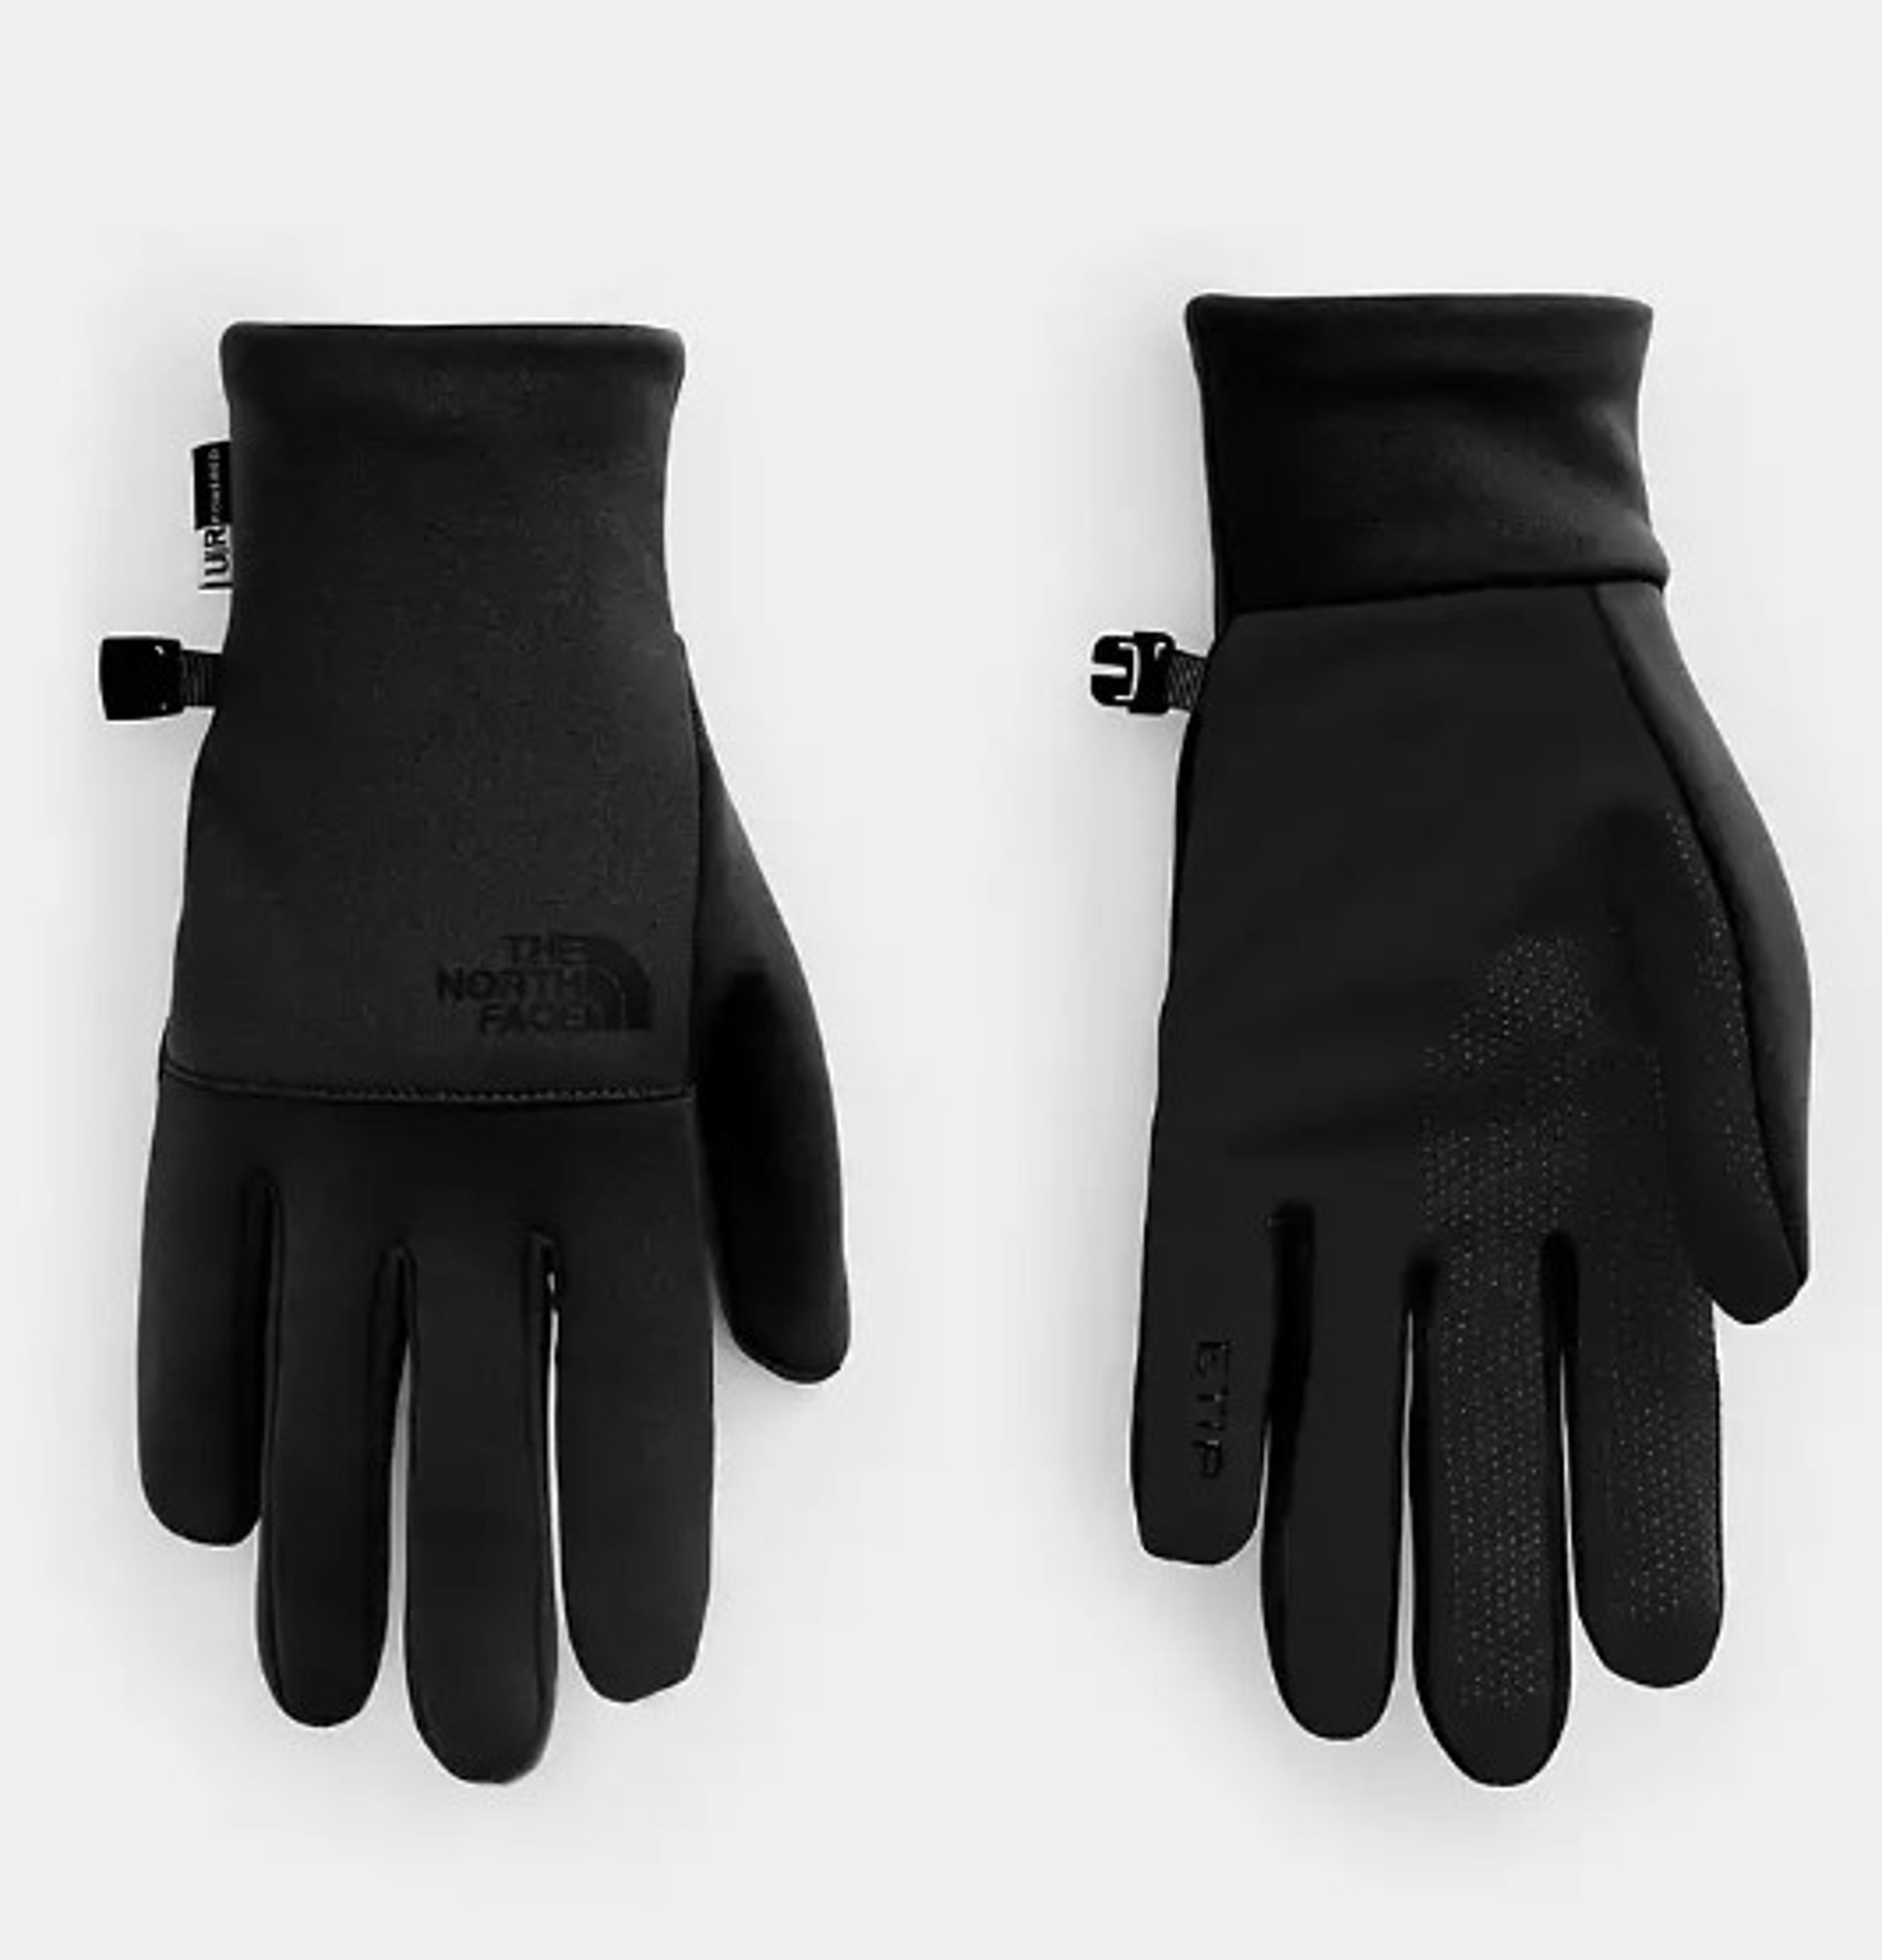  Etip Recycled Glove